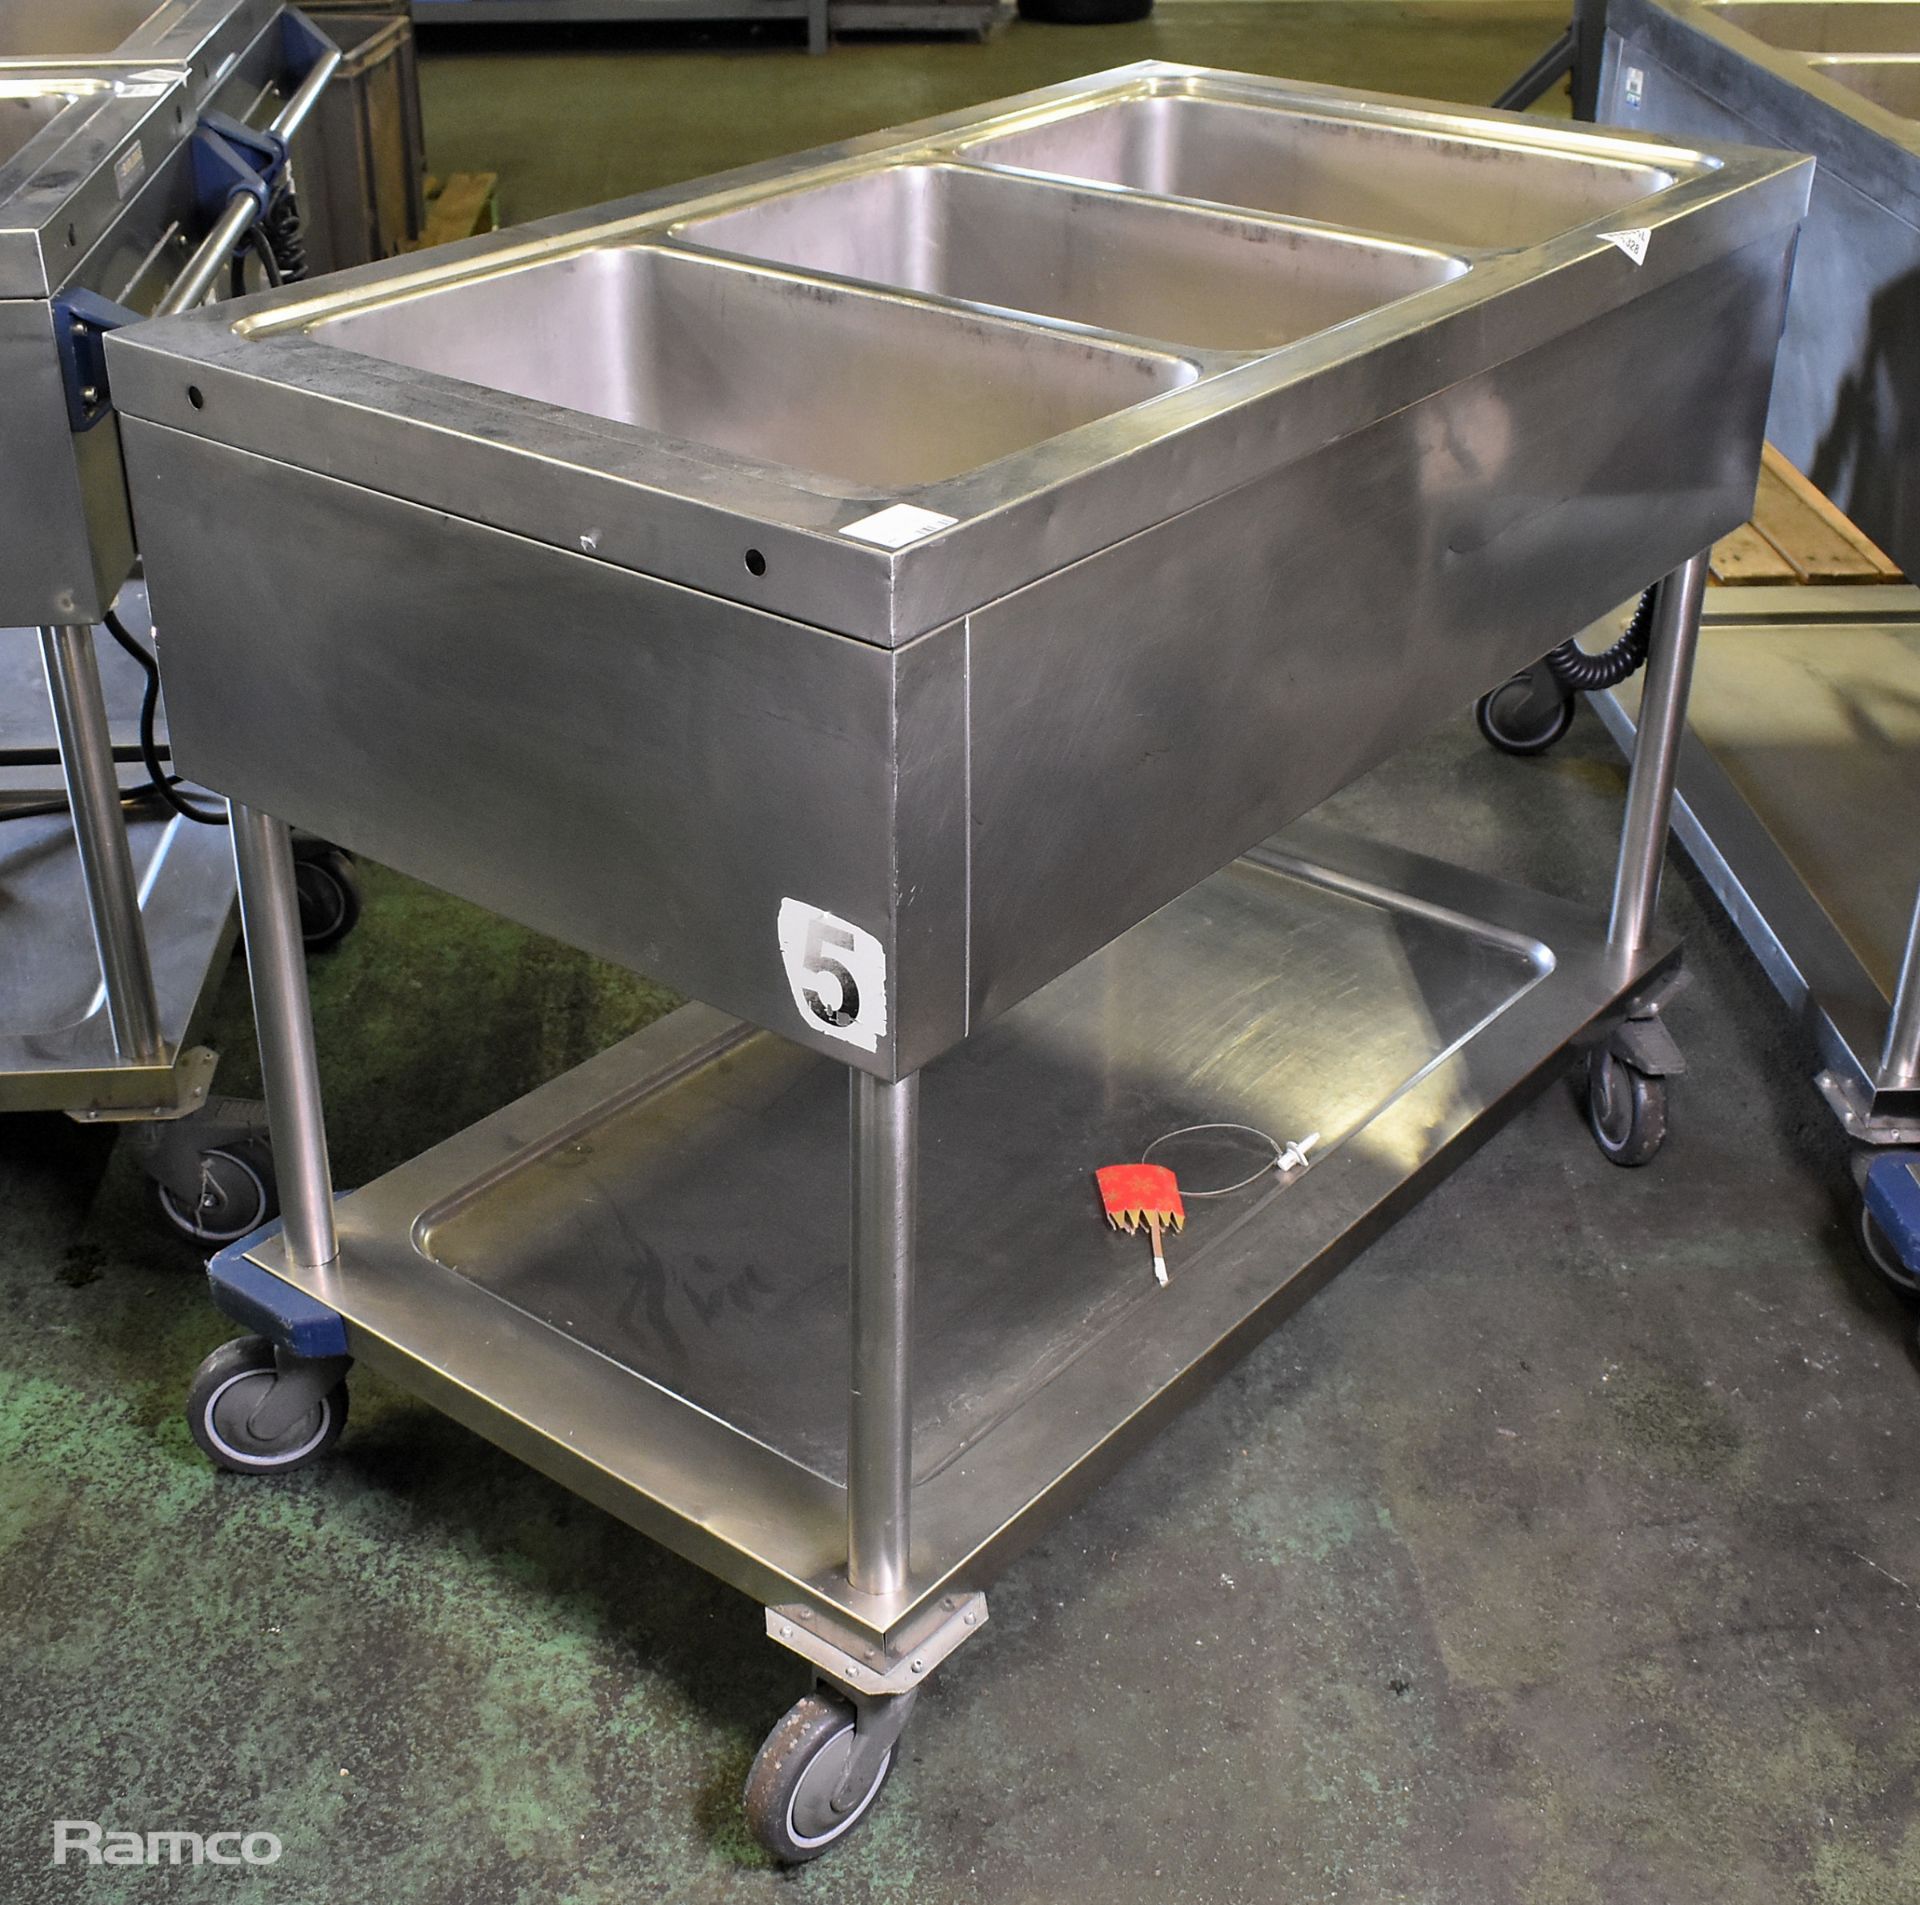 Stainless steel water heated bain-marie trolley - L 1160 x W 640 x H 920mm - Image 6 of 6